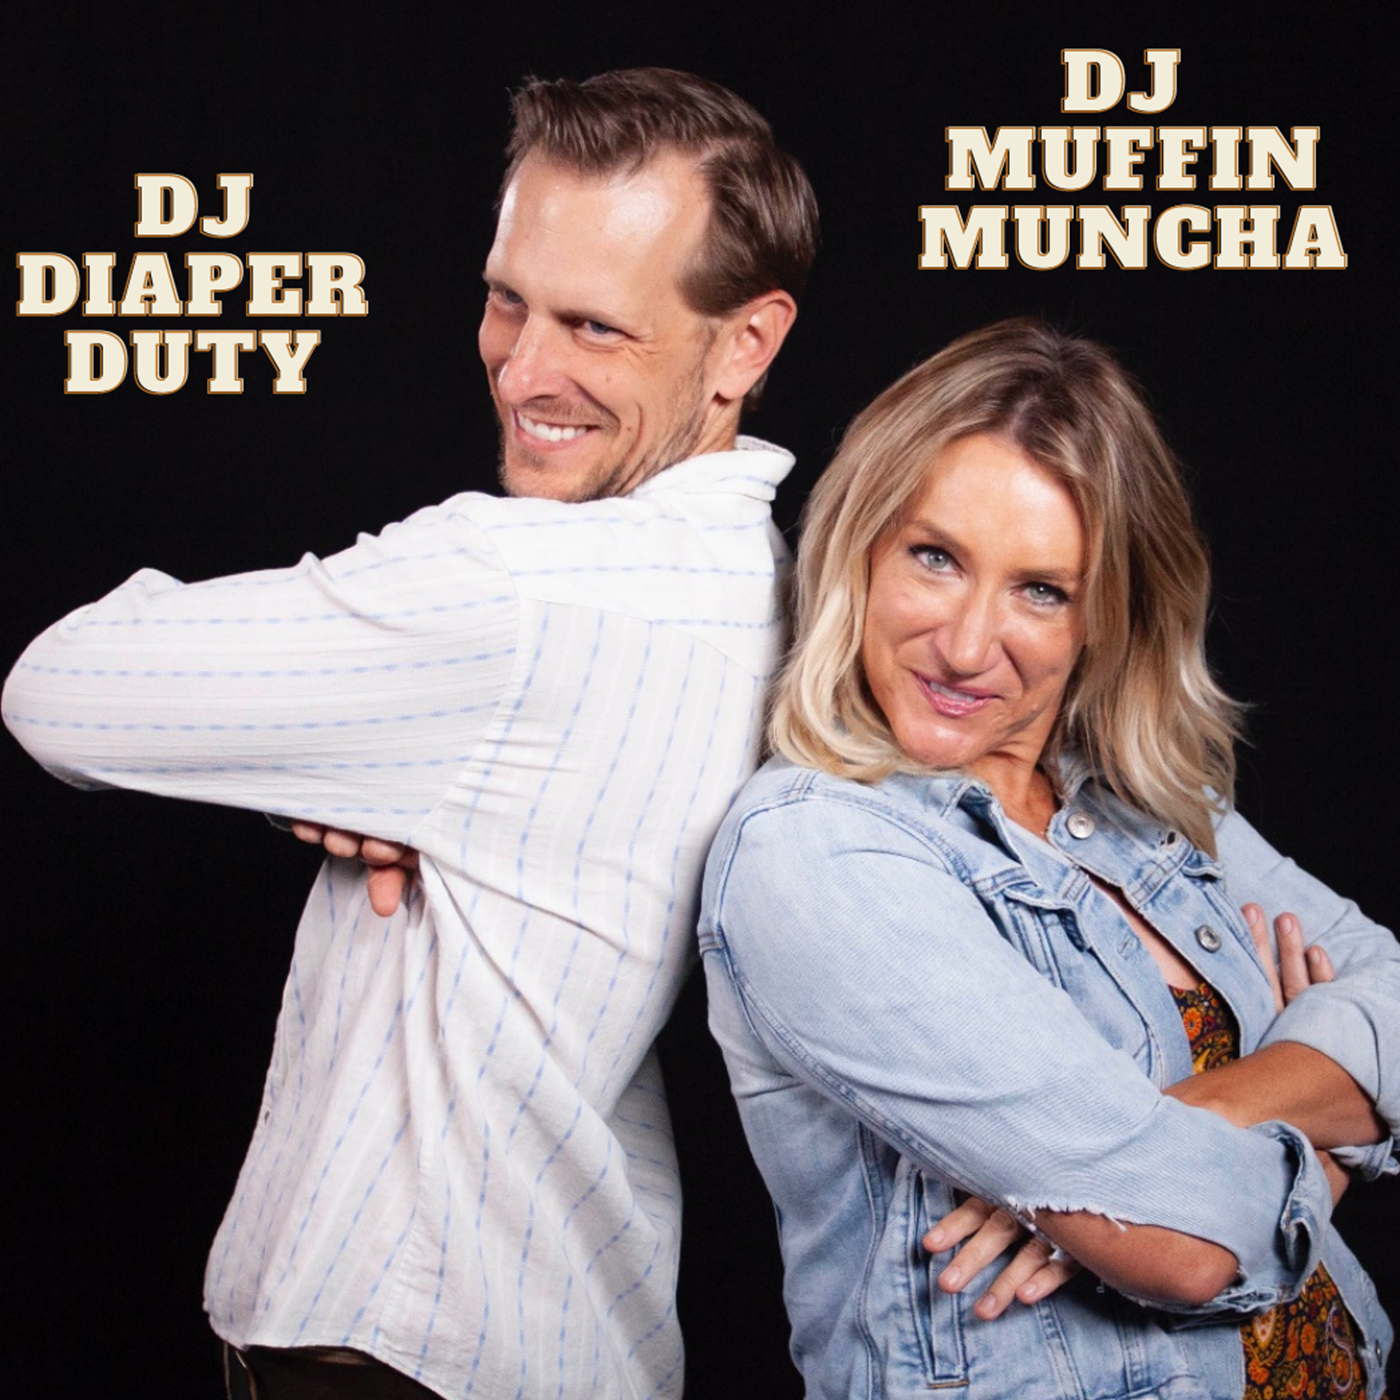 Happy Mothers Day!  Our favorite Brother Sister Rap Duo DJ Diaper Duty and DJ Muffin Muncha are calling Teresa at a local library to see if we can perform for the kiddo's for Mother's Day!